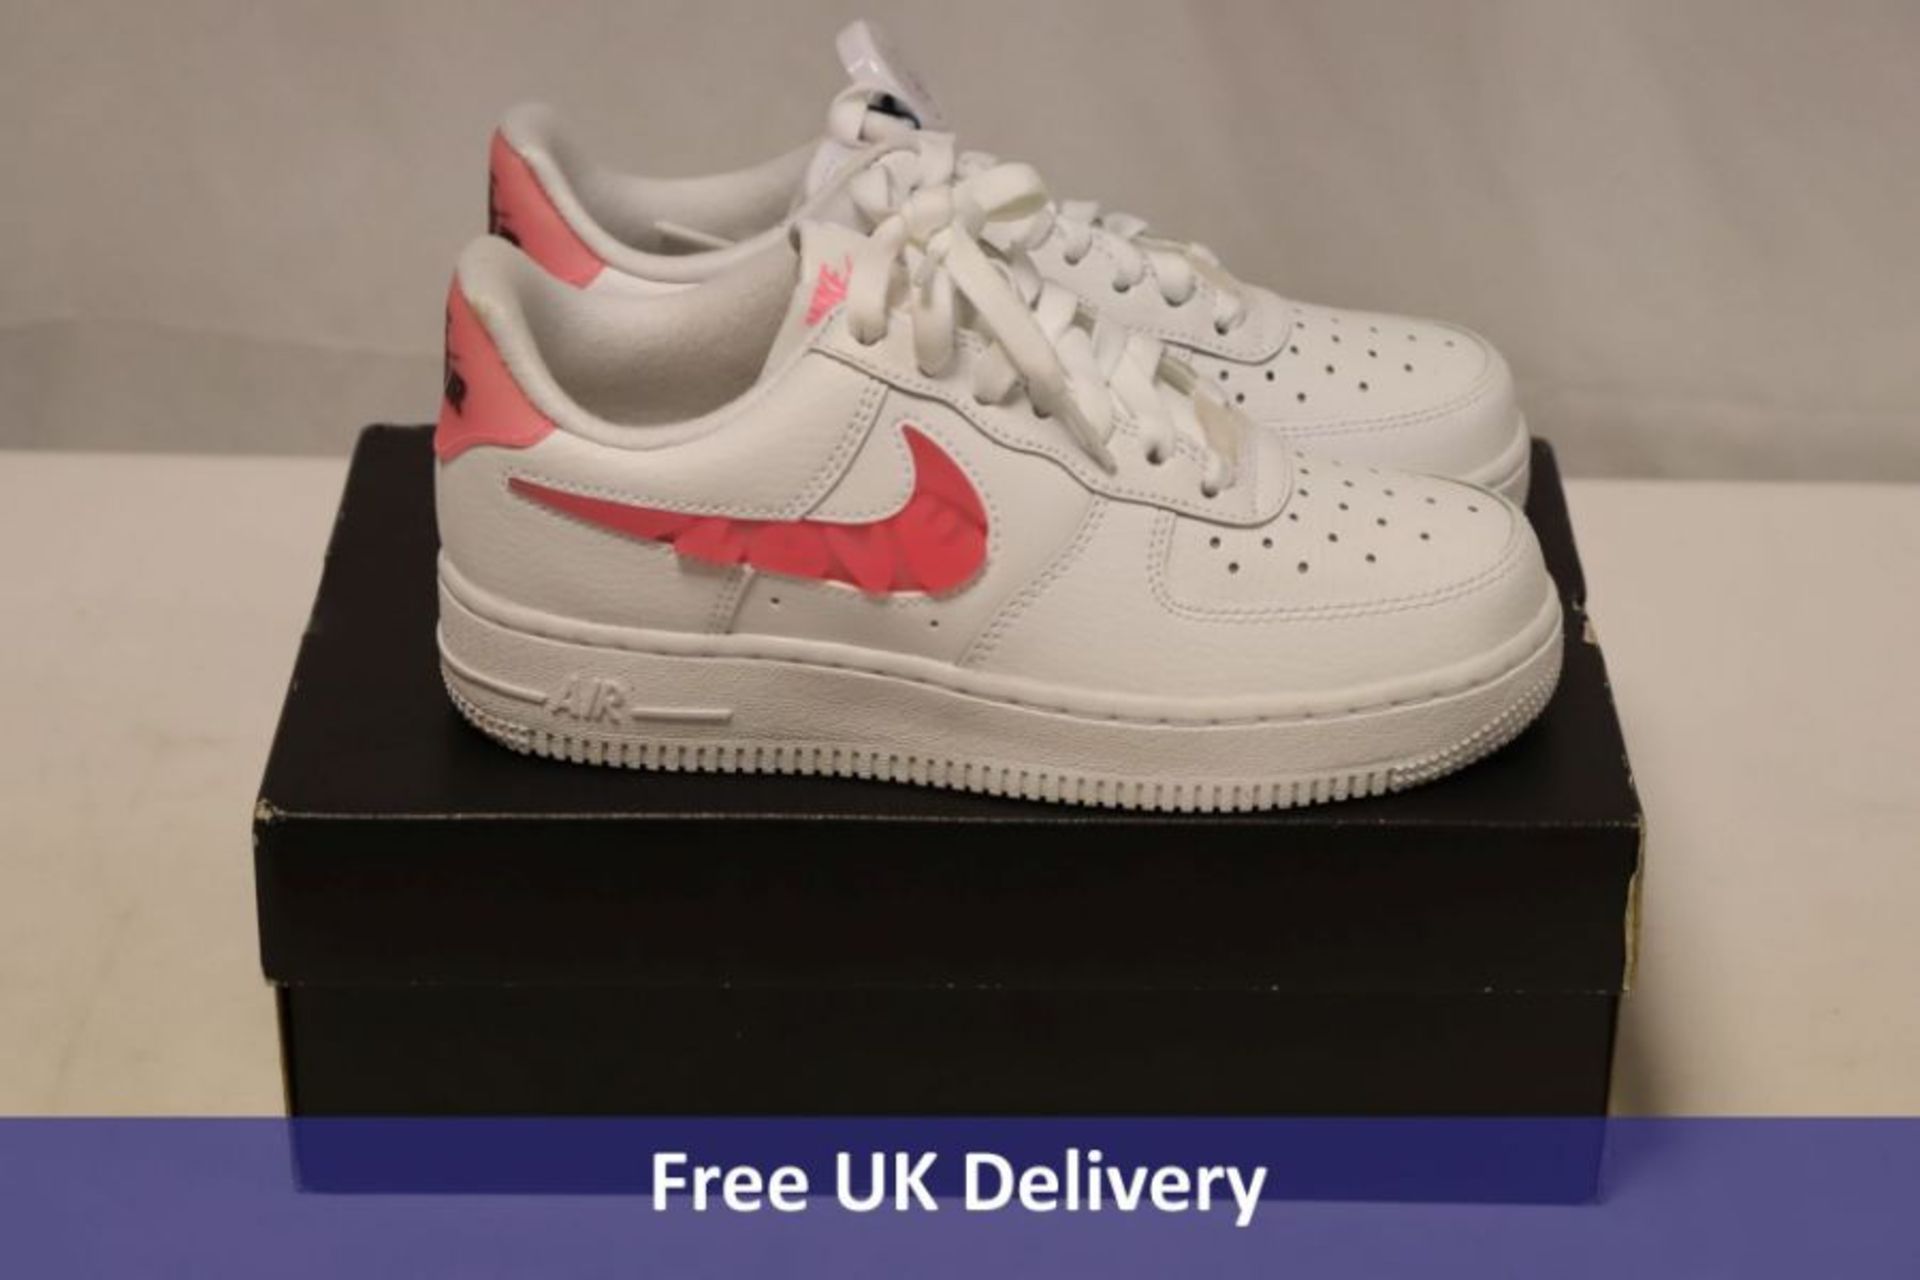 Nike Air Force 1 '07 SE Love For All Women's Trainers, White/Sunset Pulse/Black/Clear, UK 3